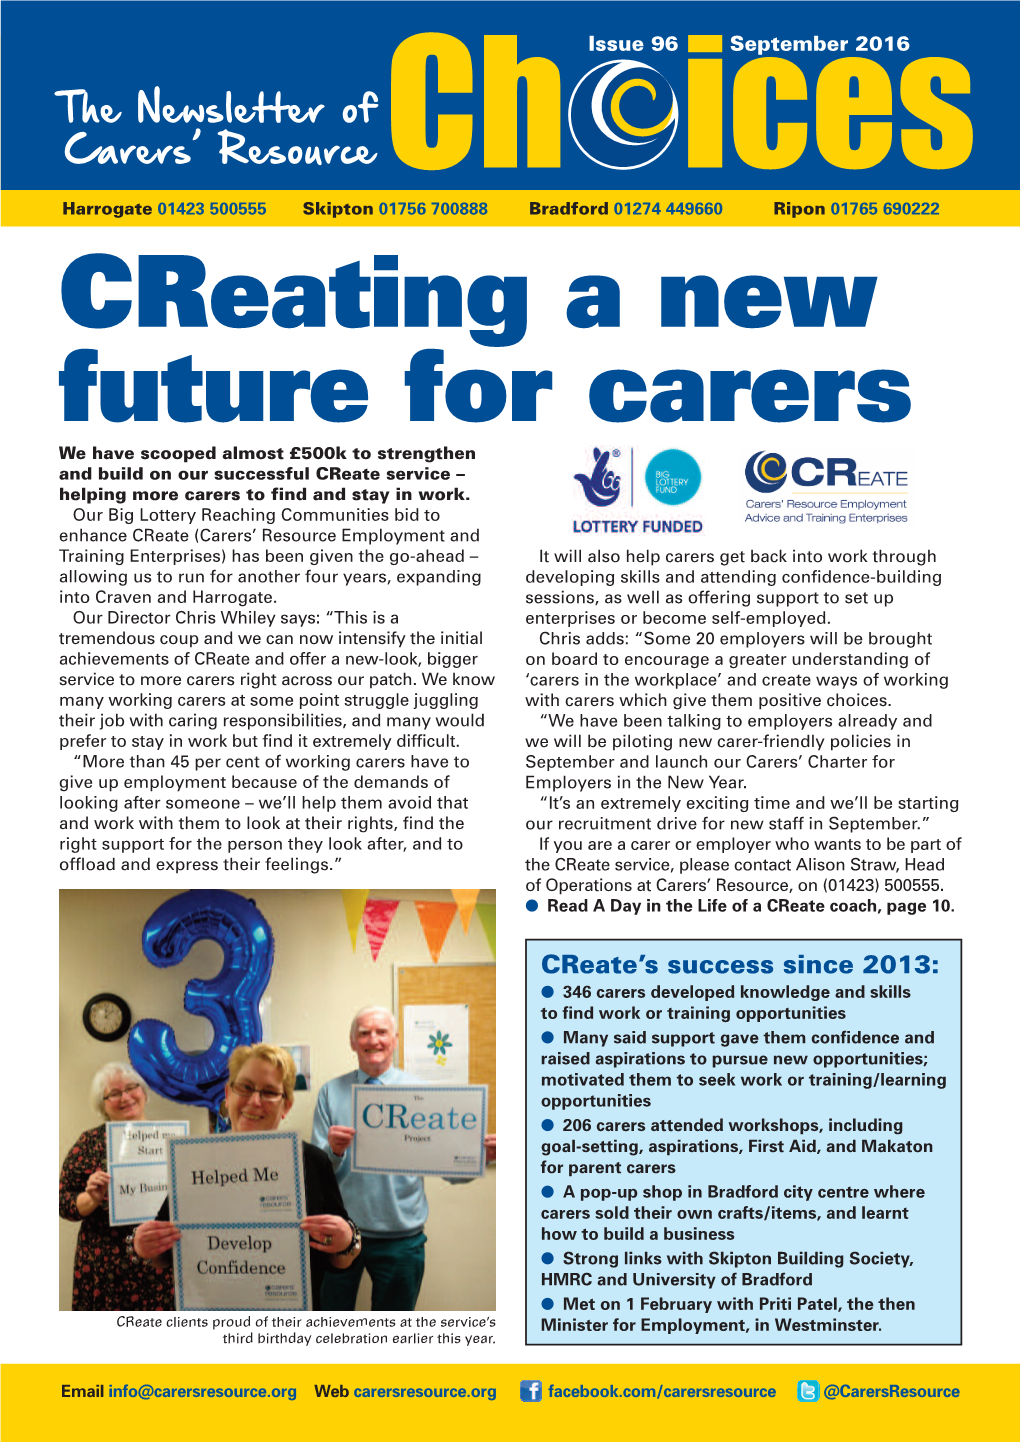 Creating a New Future for Carers We Have Scooped Almost £500K to Strengthen and Build on Our Successful Create Service – Helping More Carers to Find and Stay in Work